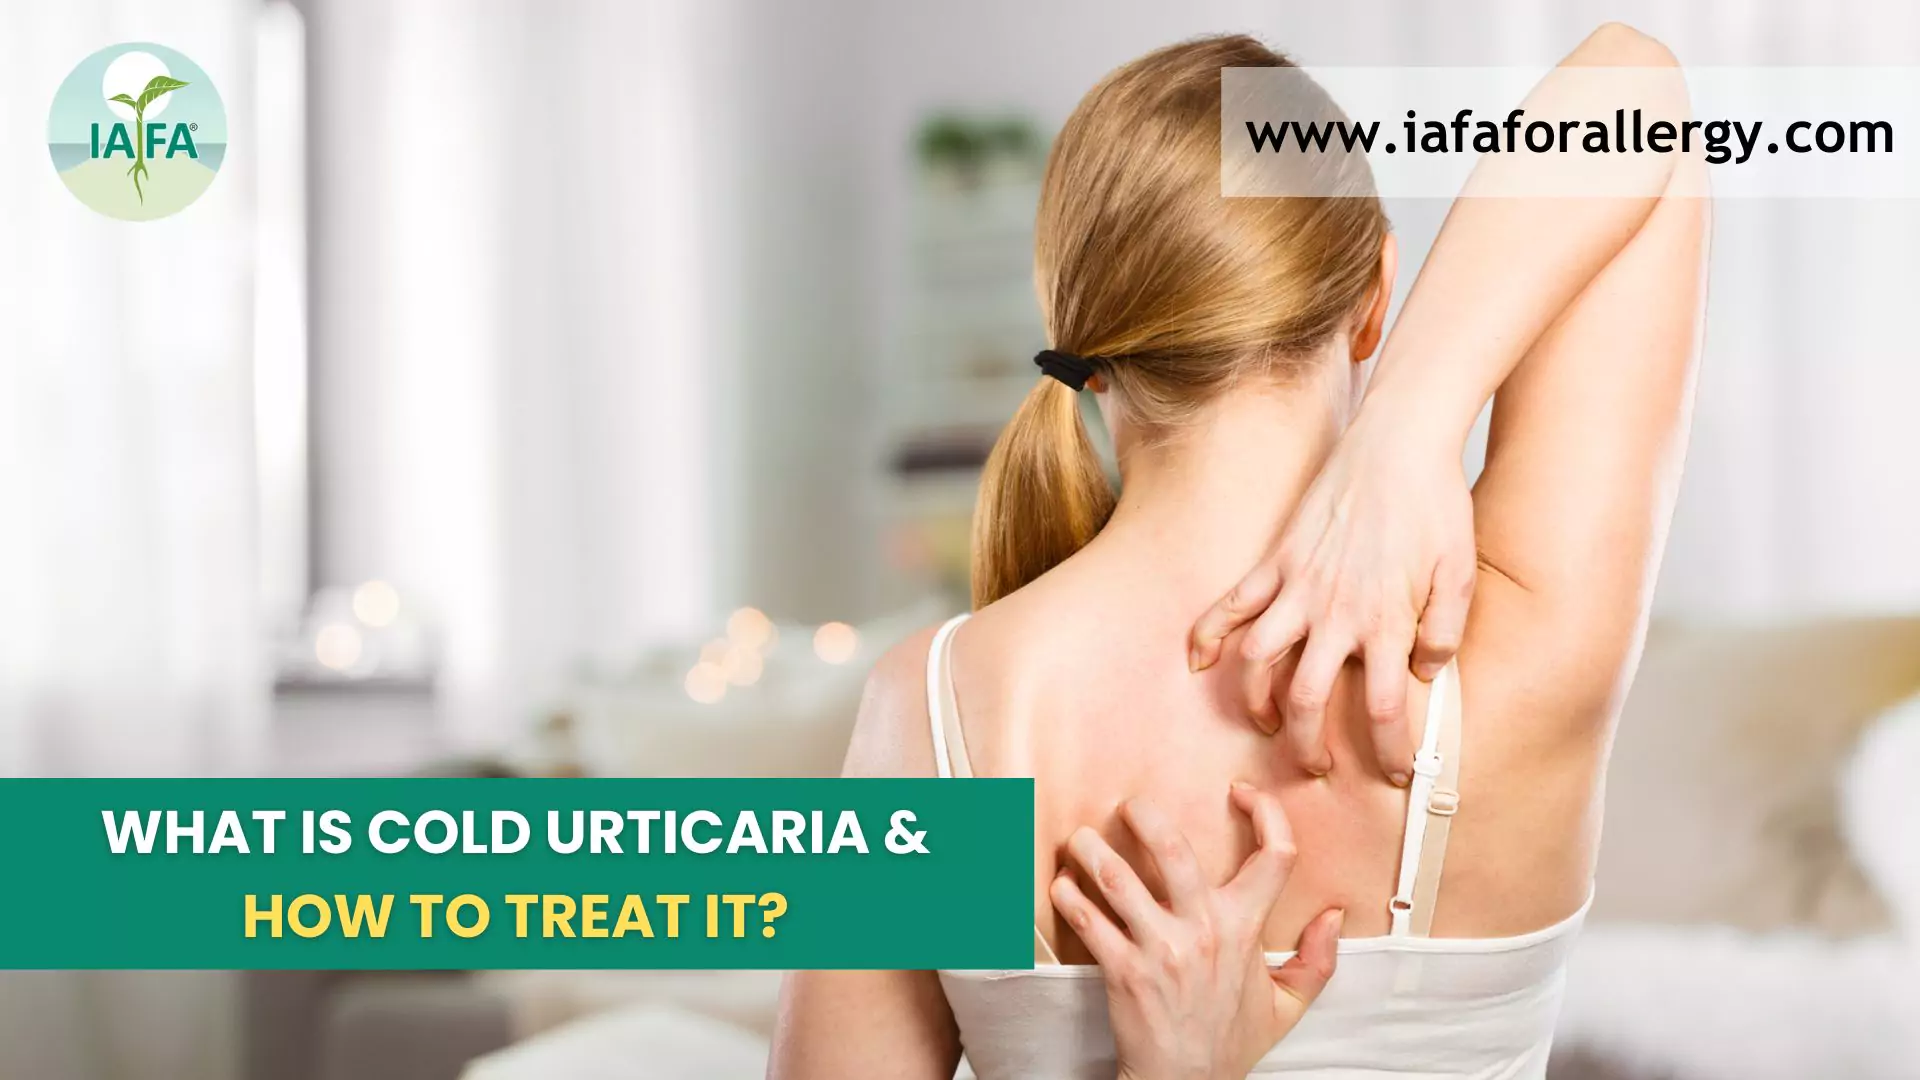 What is Cold Urticaria?